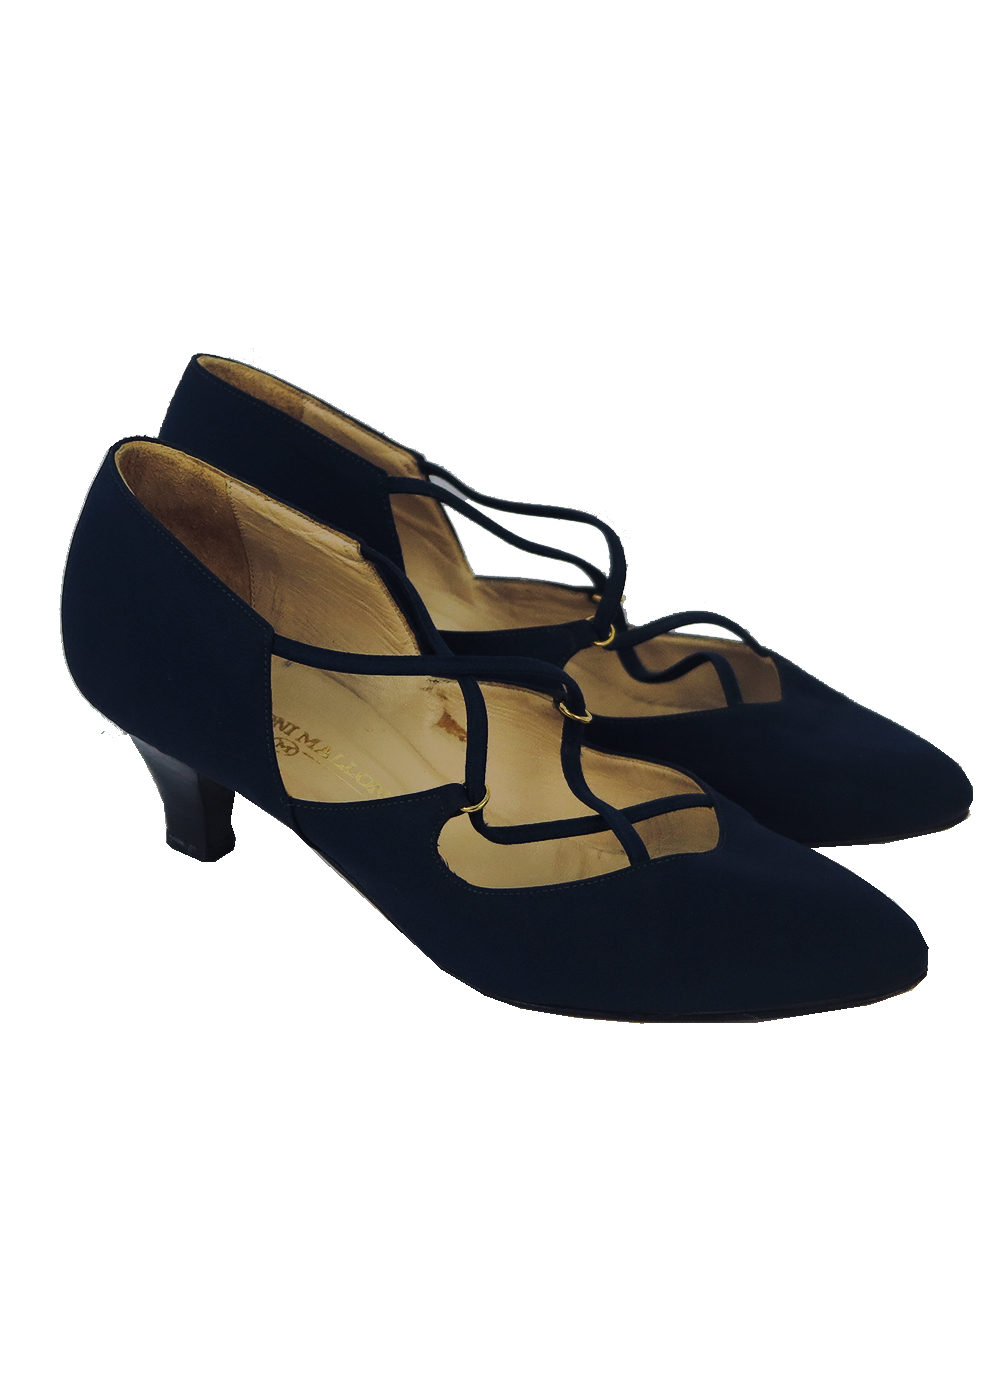 Navy Blue Leather Mid Heel Shoes with 